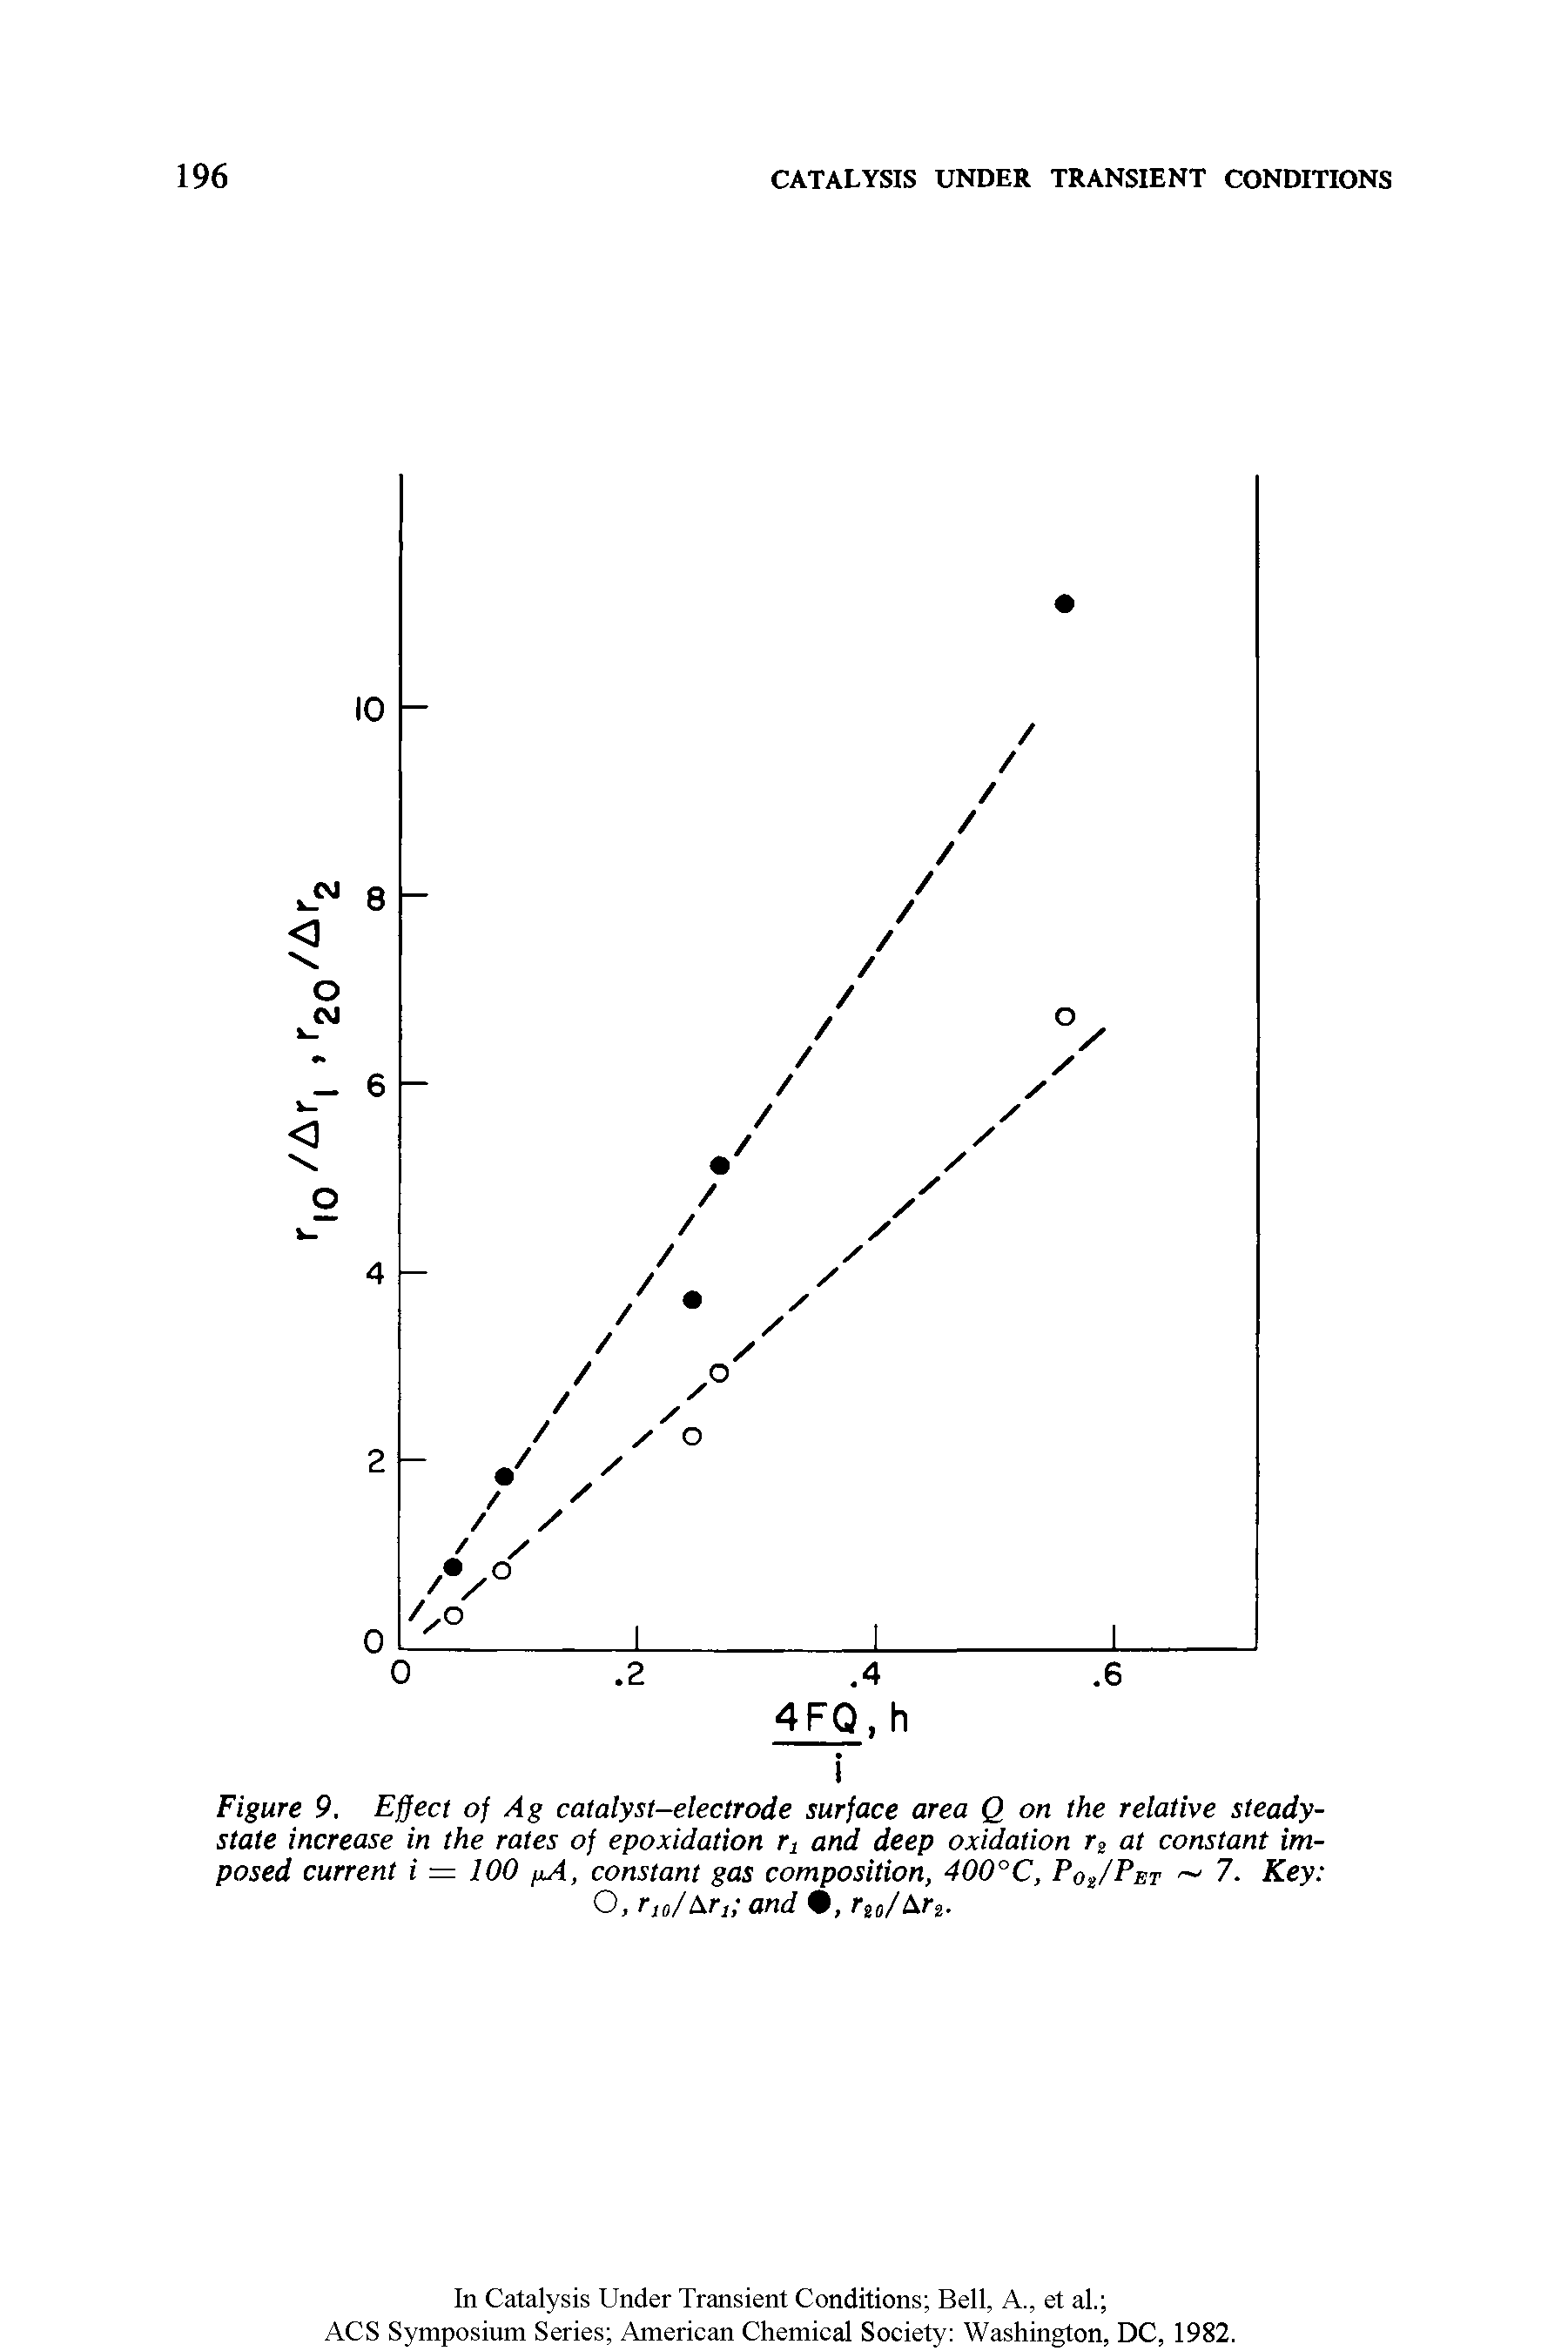 Figure 9. Effect of Ag catalyst-electrode surface area Q on the relative steady-state increase in the rates of epoxidation rt and deep oxidation r2 at constant imposed current i = 100 /jA, constant gas composition, 400°C, Po /Pet 7. Key O, r10/Ars and , ru/Ar%.